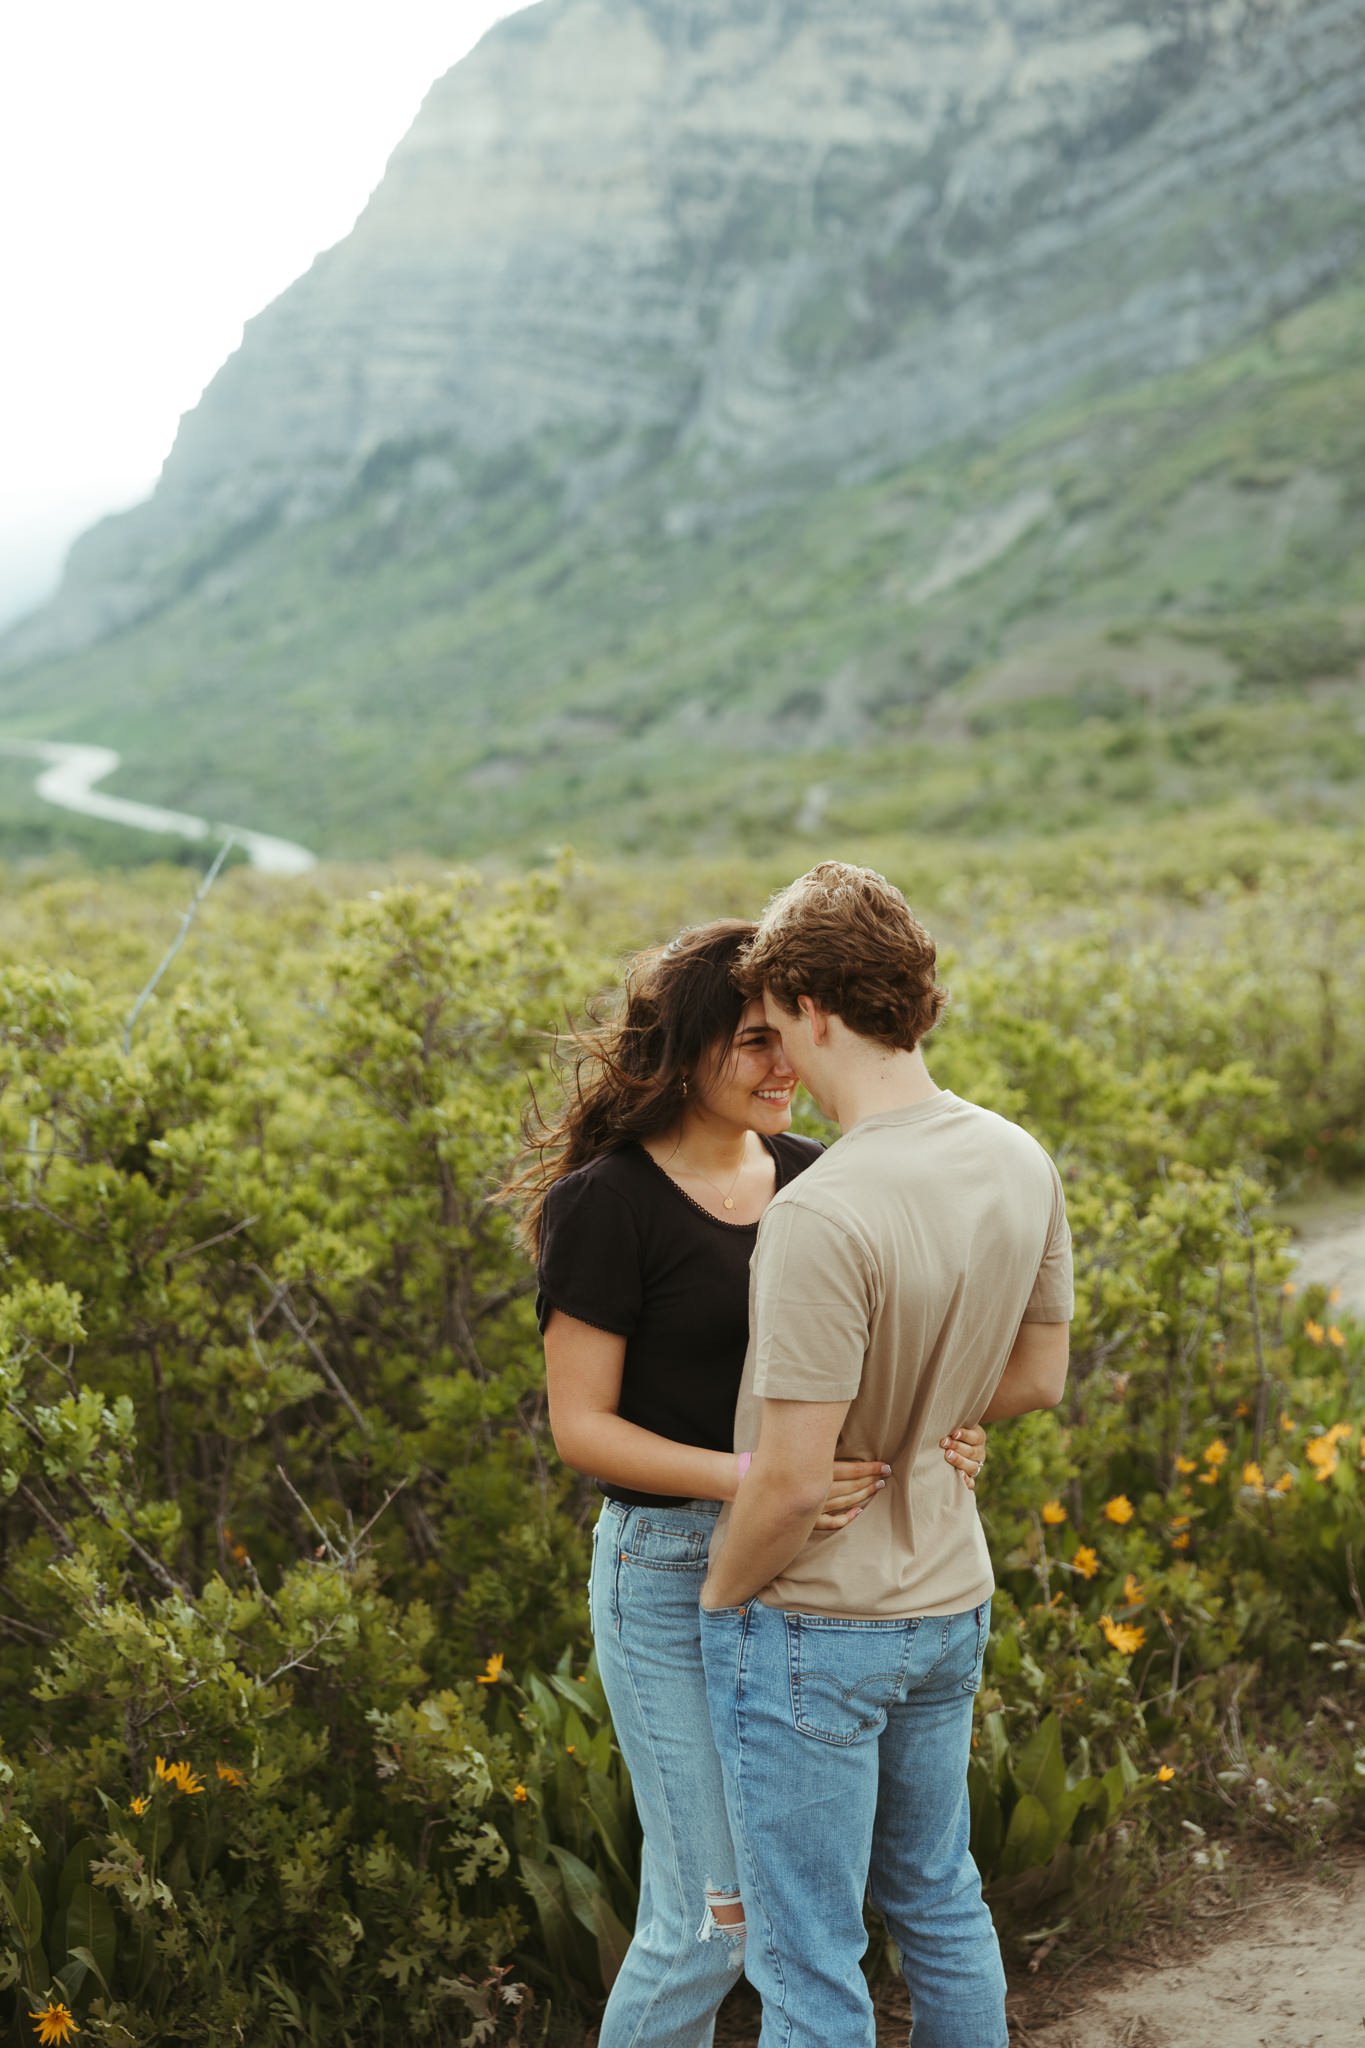 Spring-Provo-Canyon-Wildflowers-Engagement-Session-33